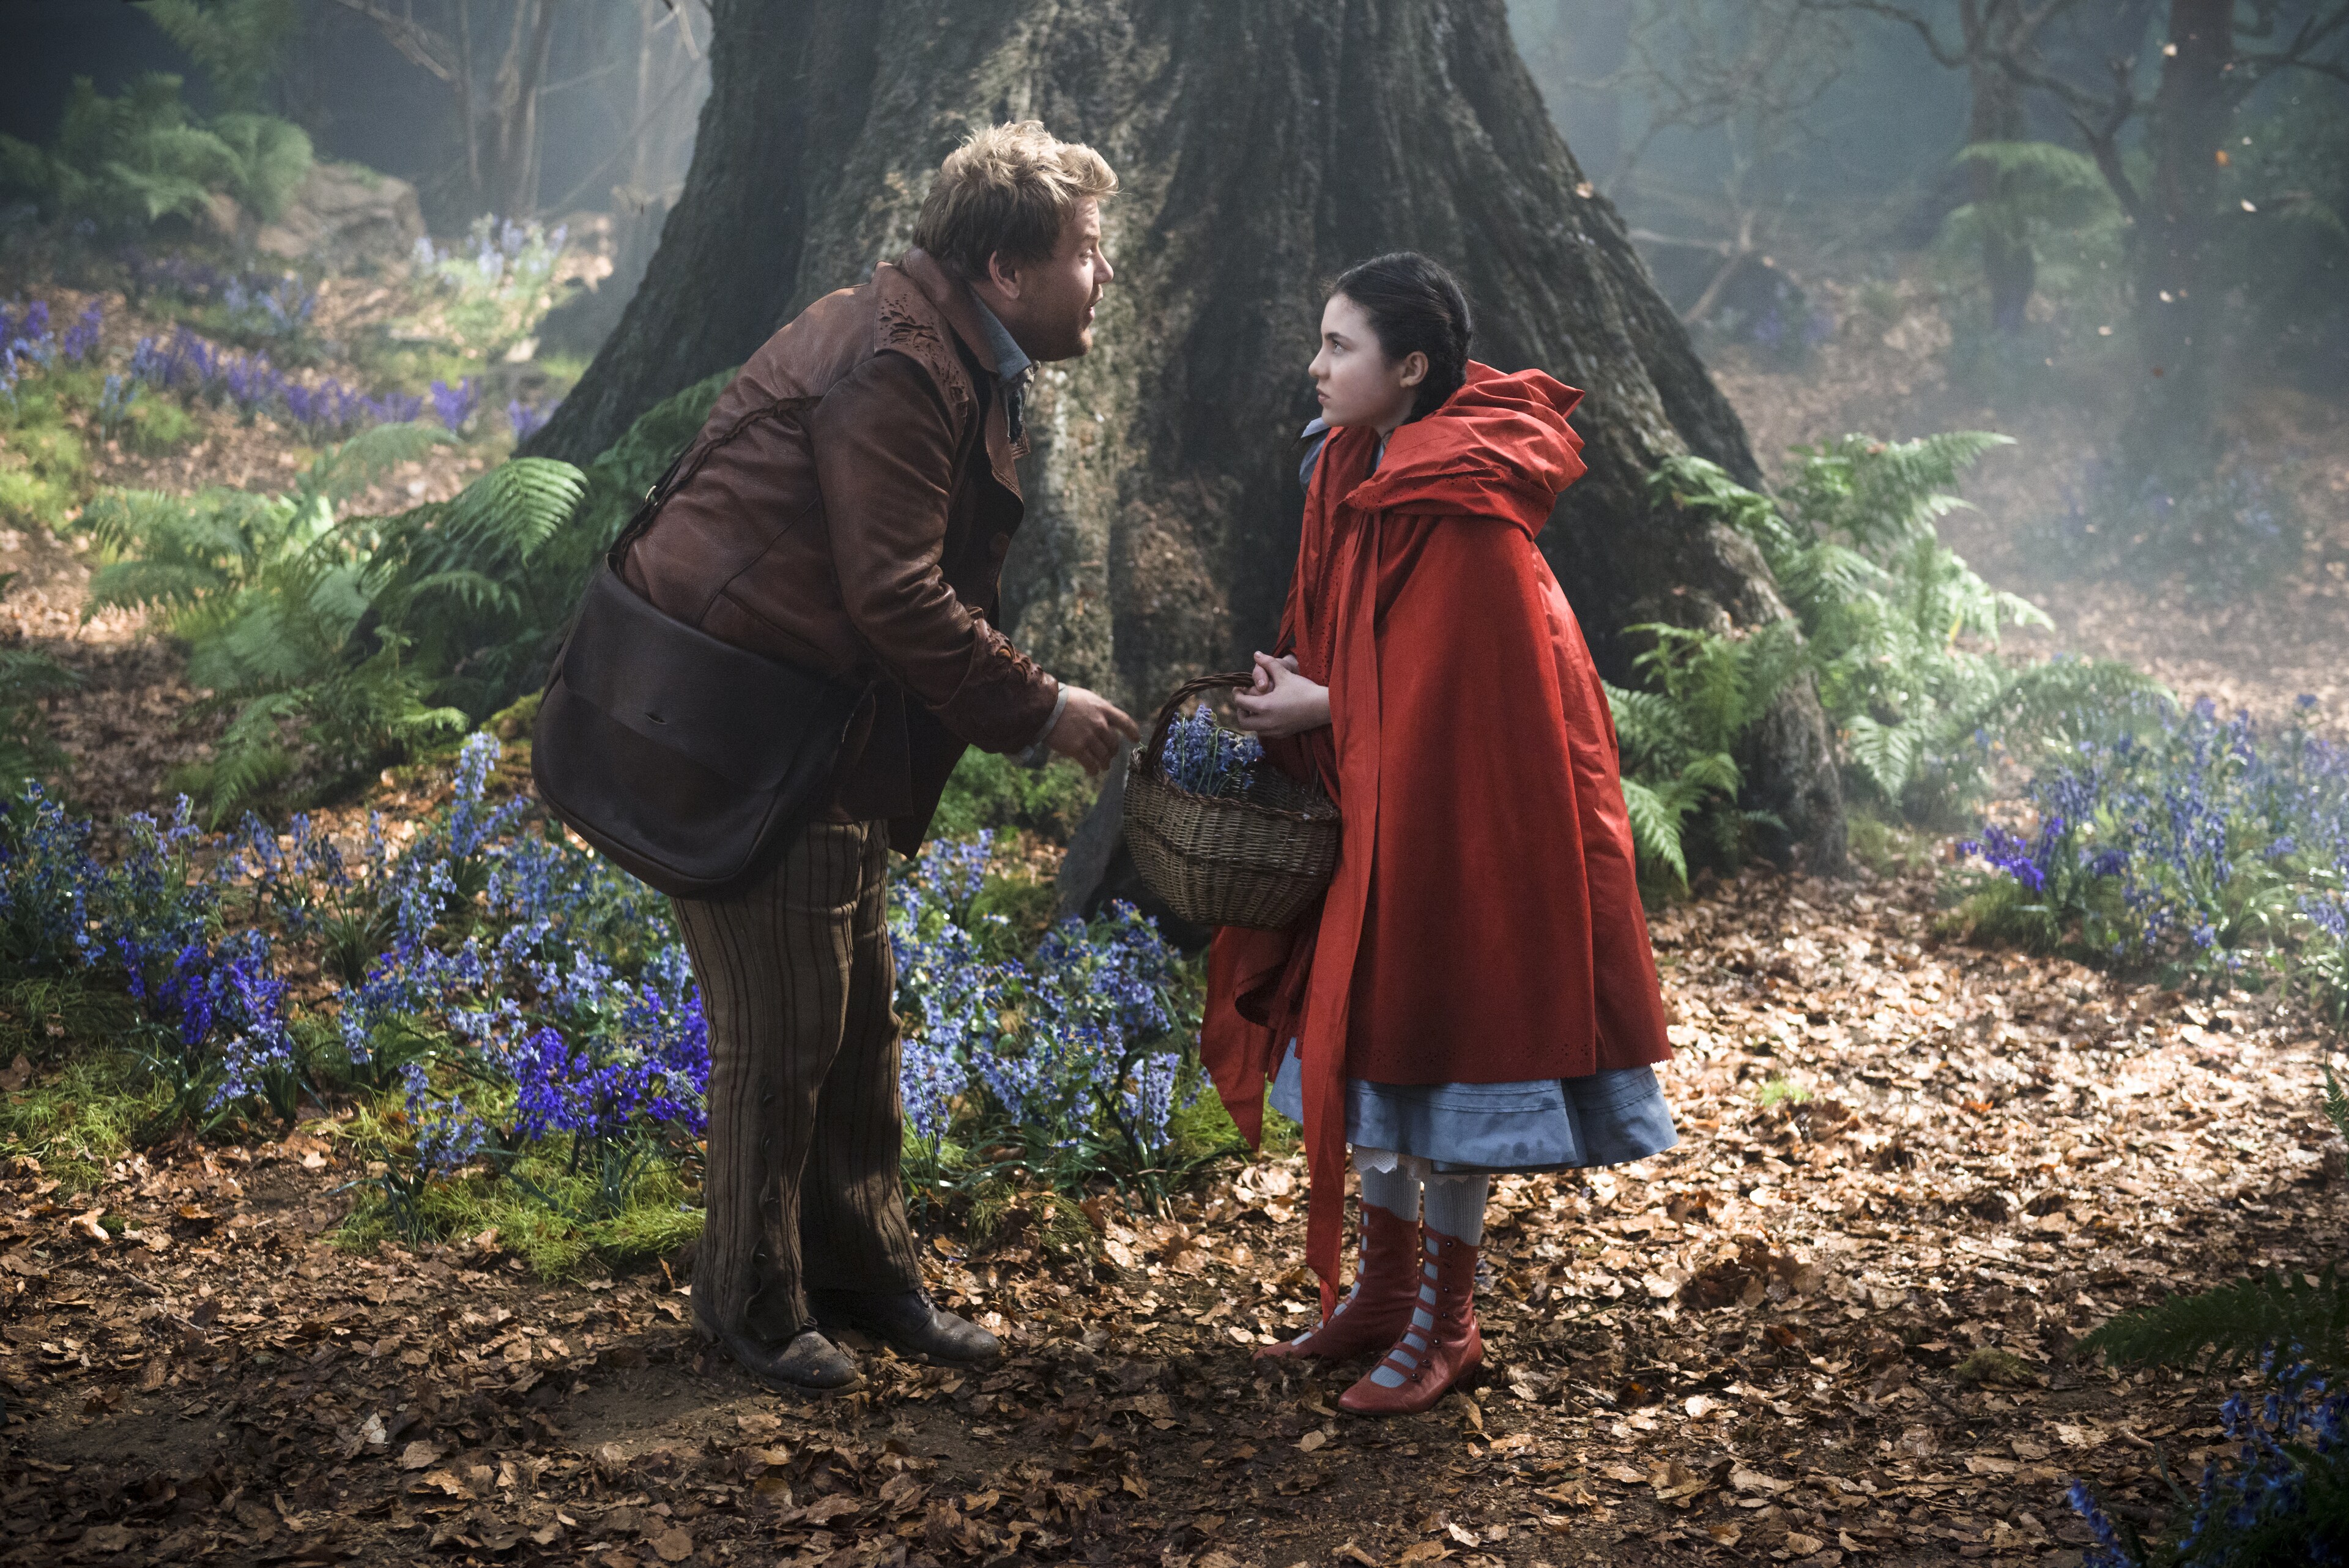 James Corden as the baker and Lilla Crawford as Little Red Riding Hood in "Into the Woods"